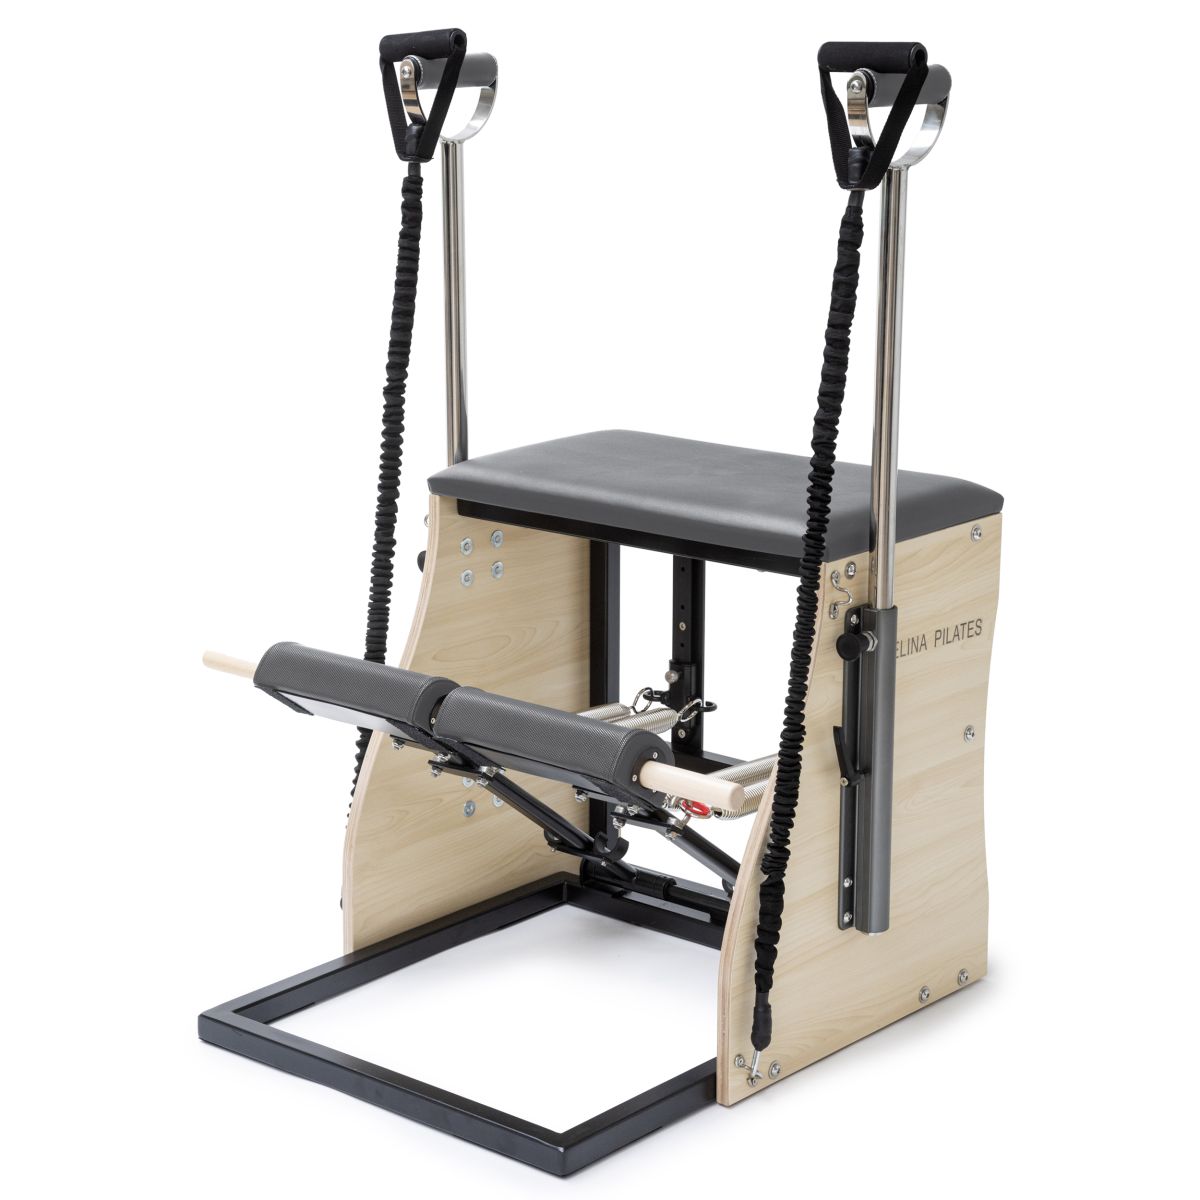 Elina Pilates Combo Chair with Handles